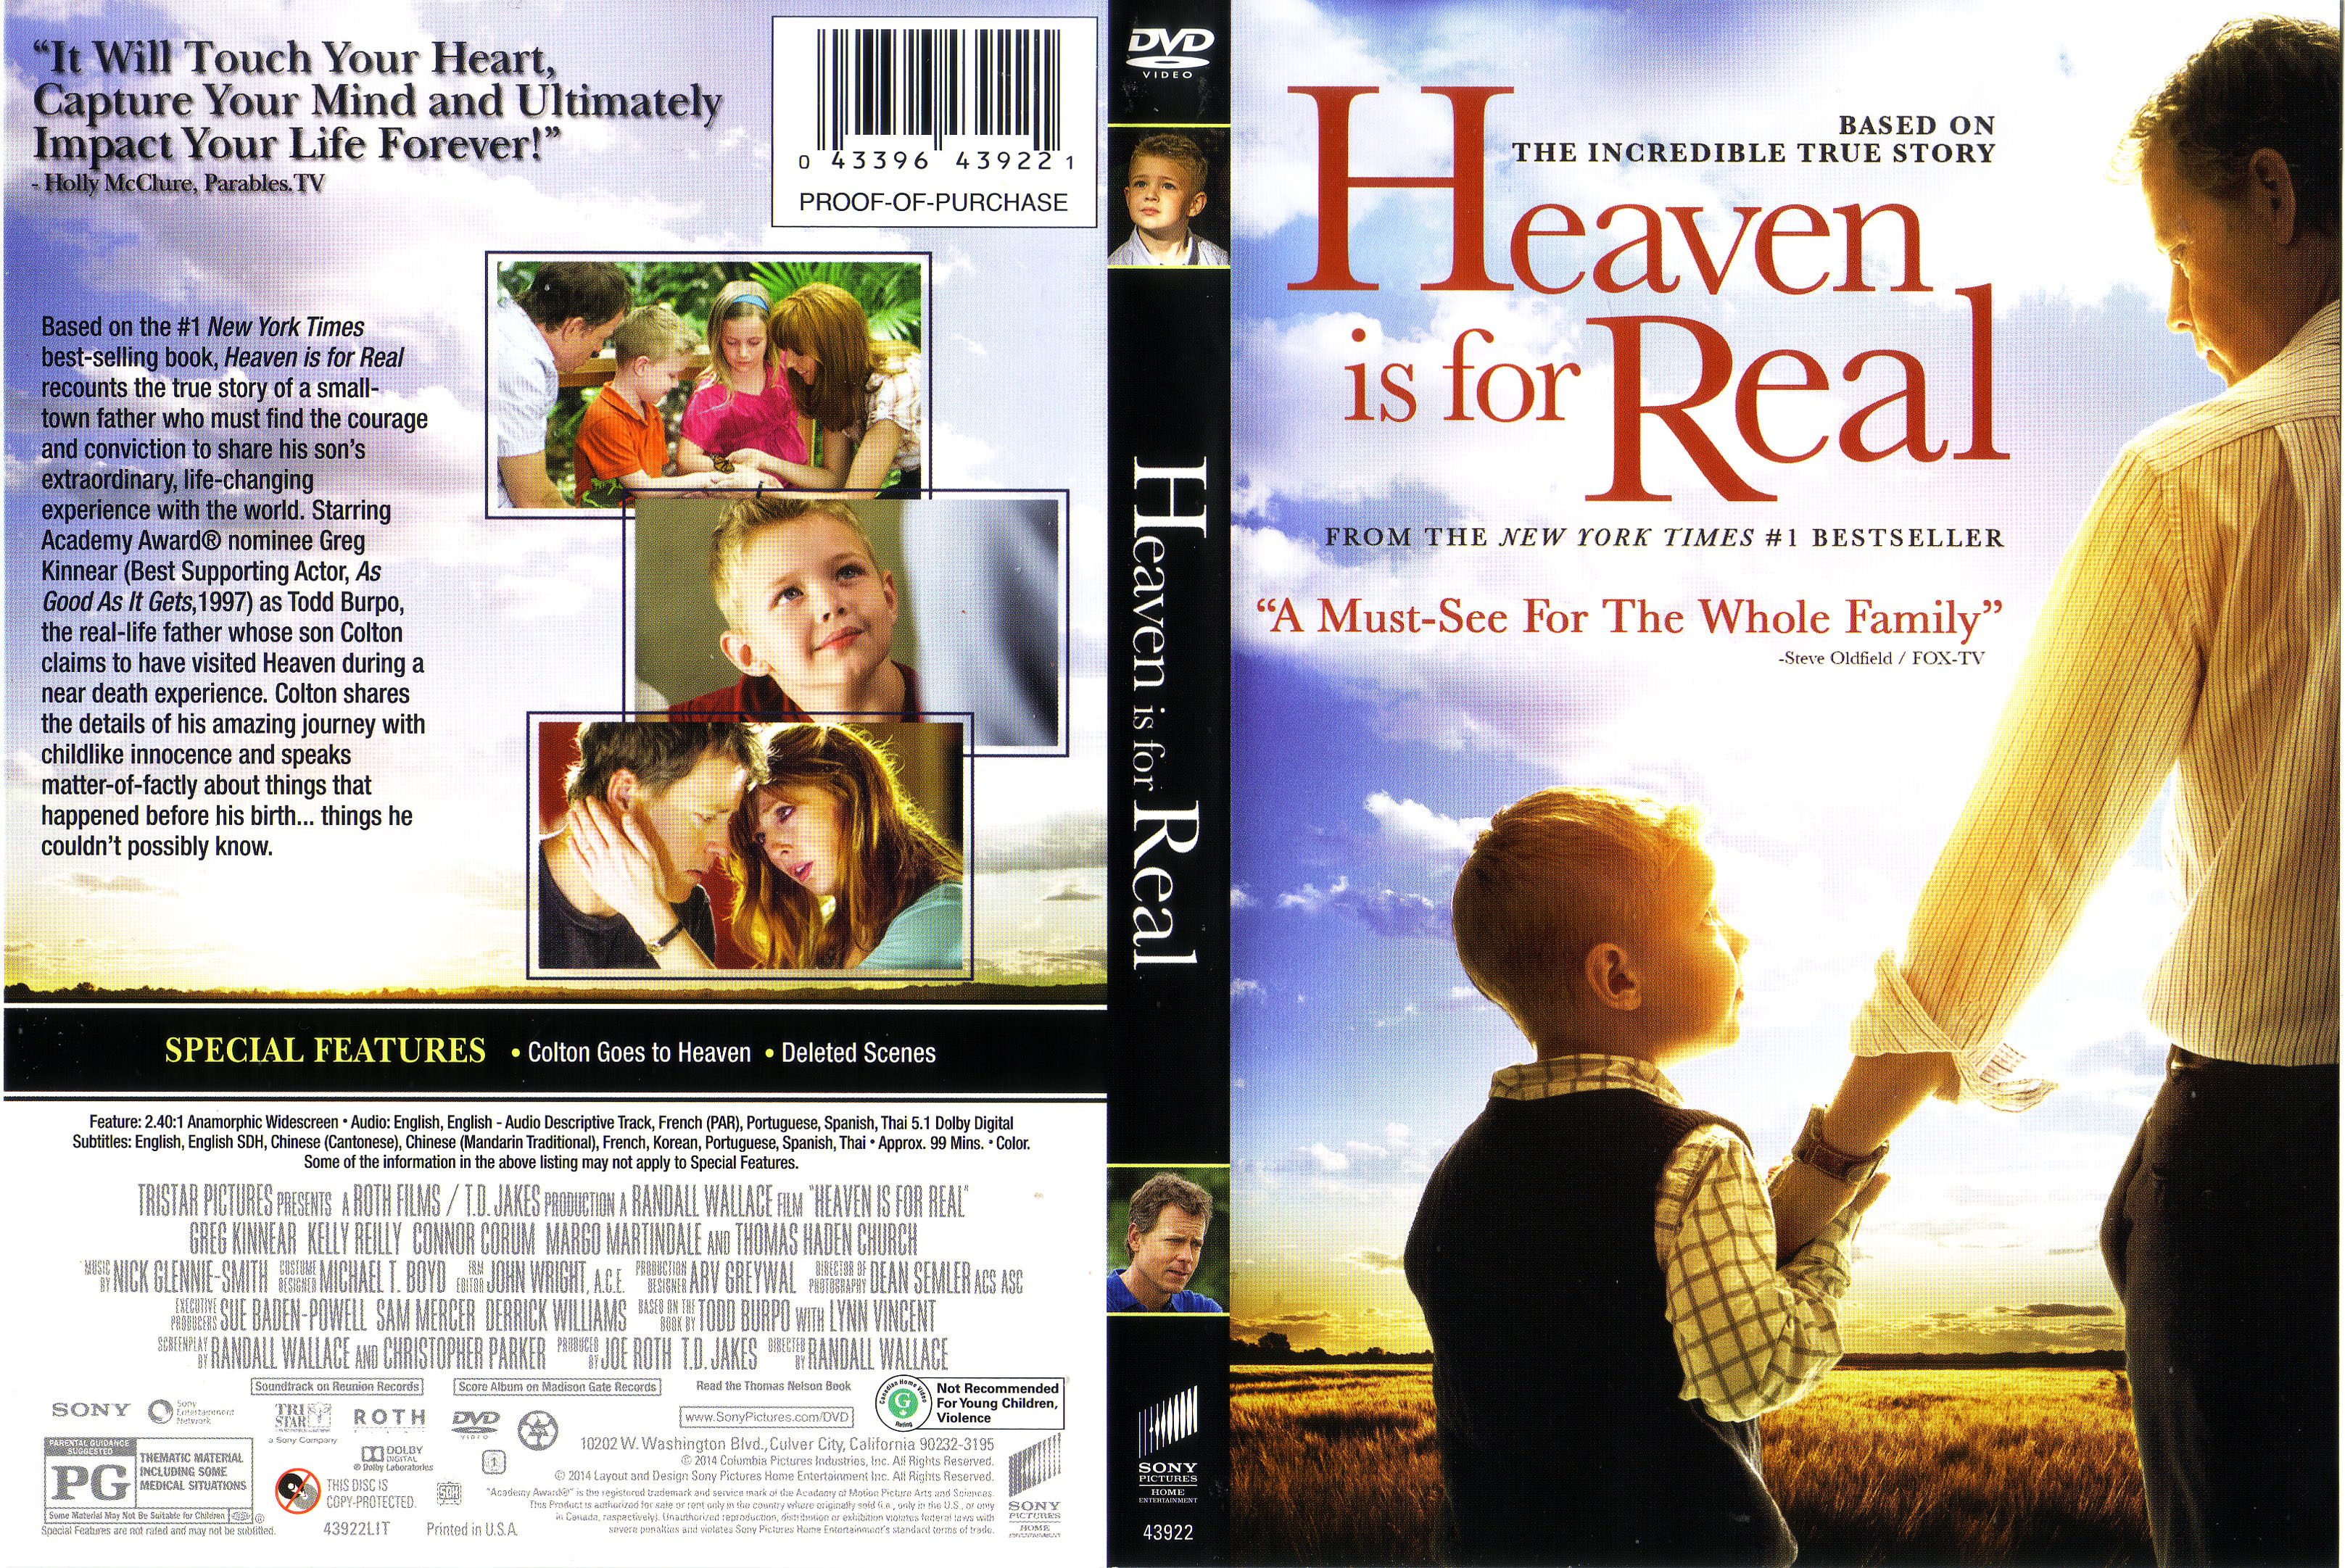 heaven is for real dvd cover art